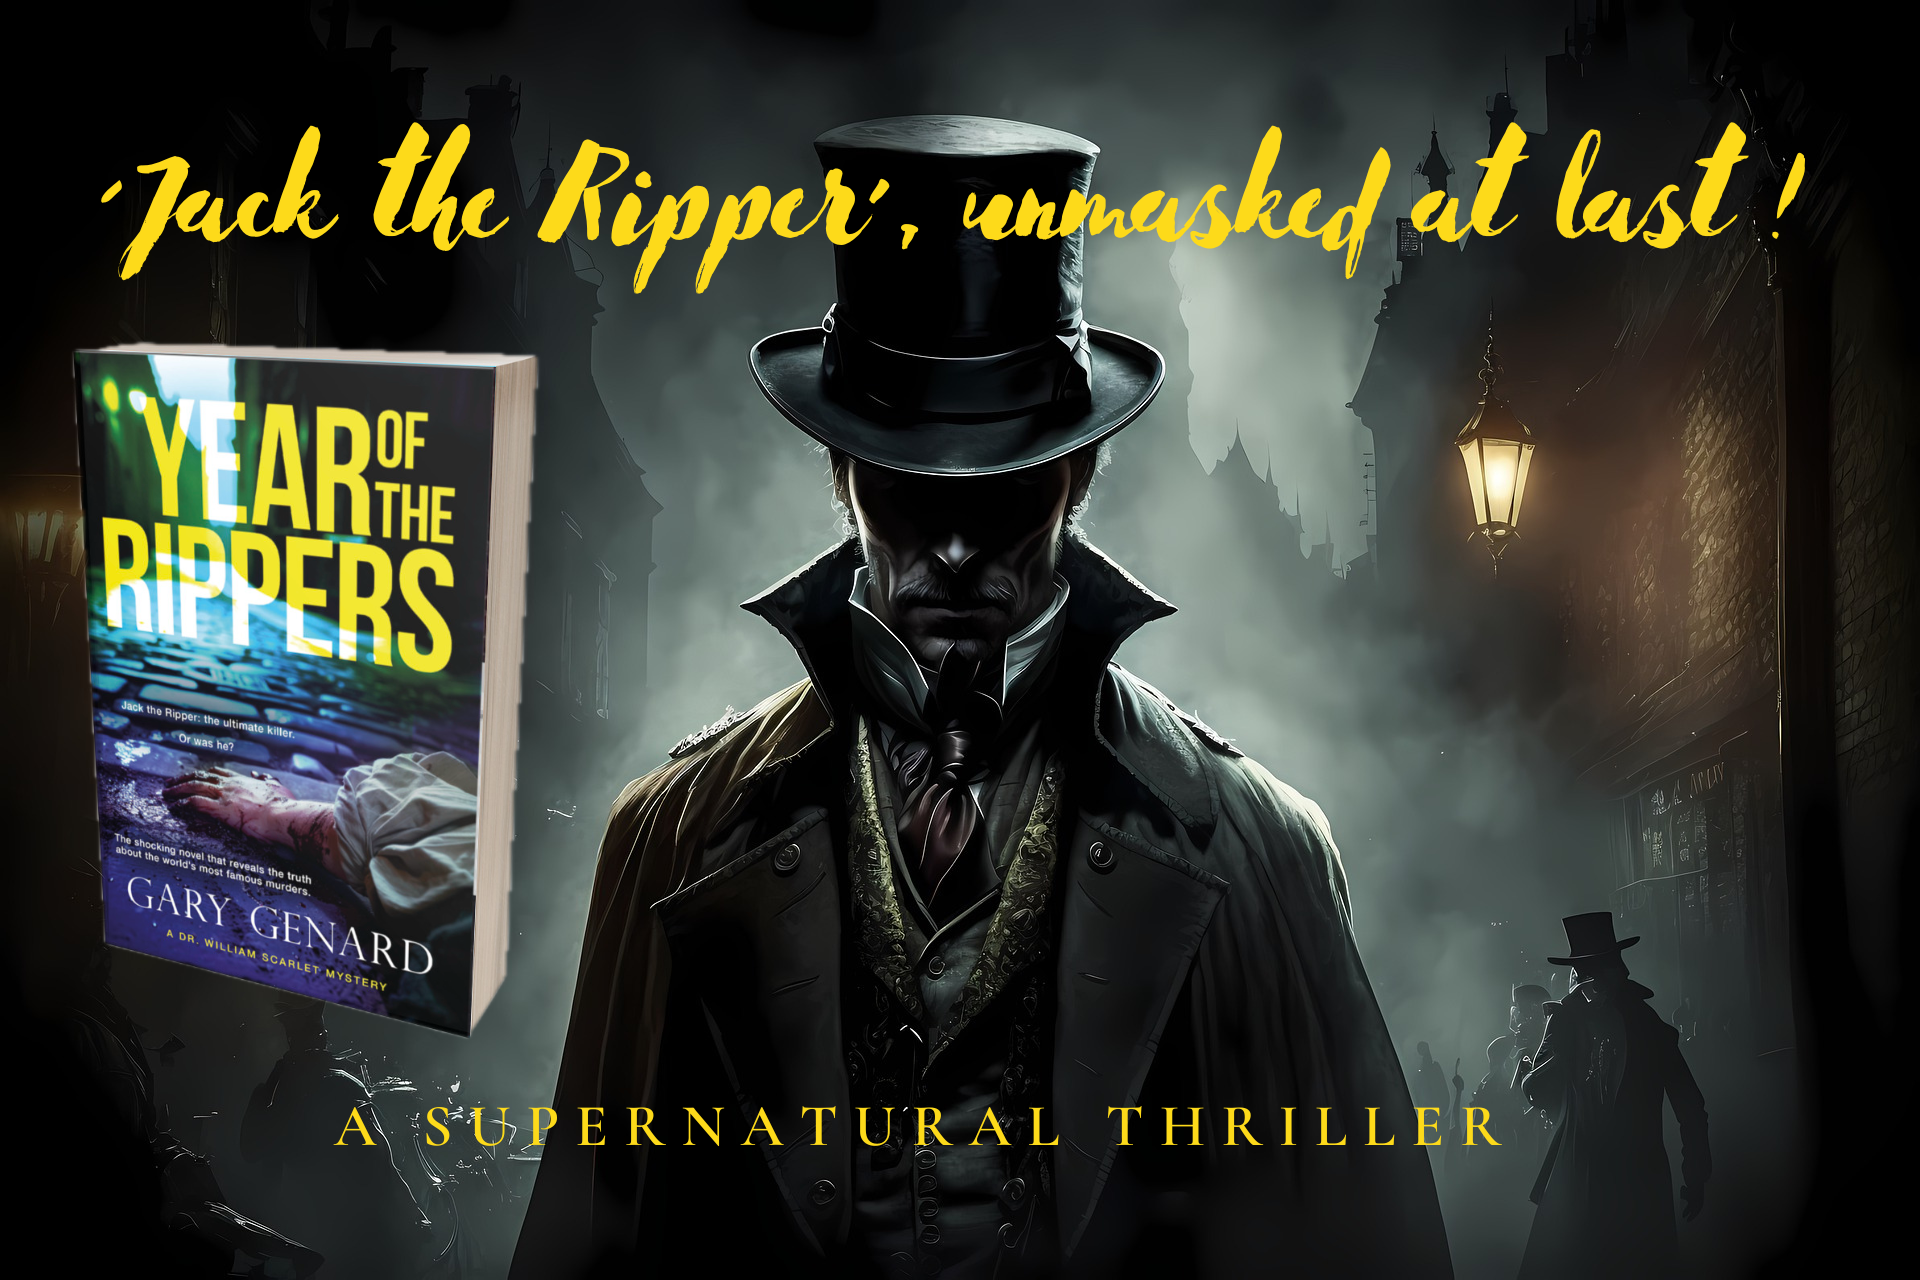 Year of the Rippers - Jack the Ripper's Identity Revealed At Last!